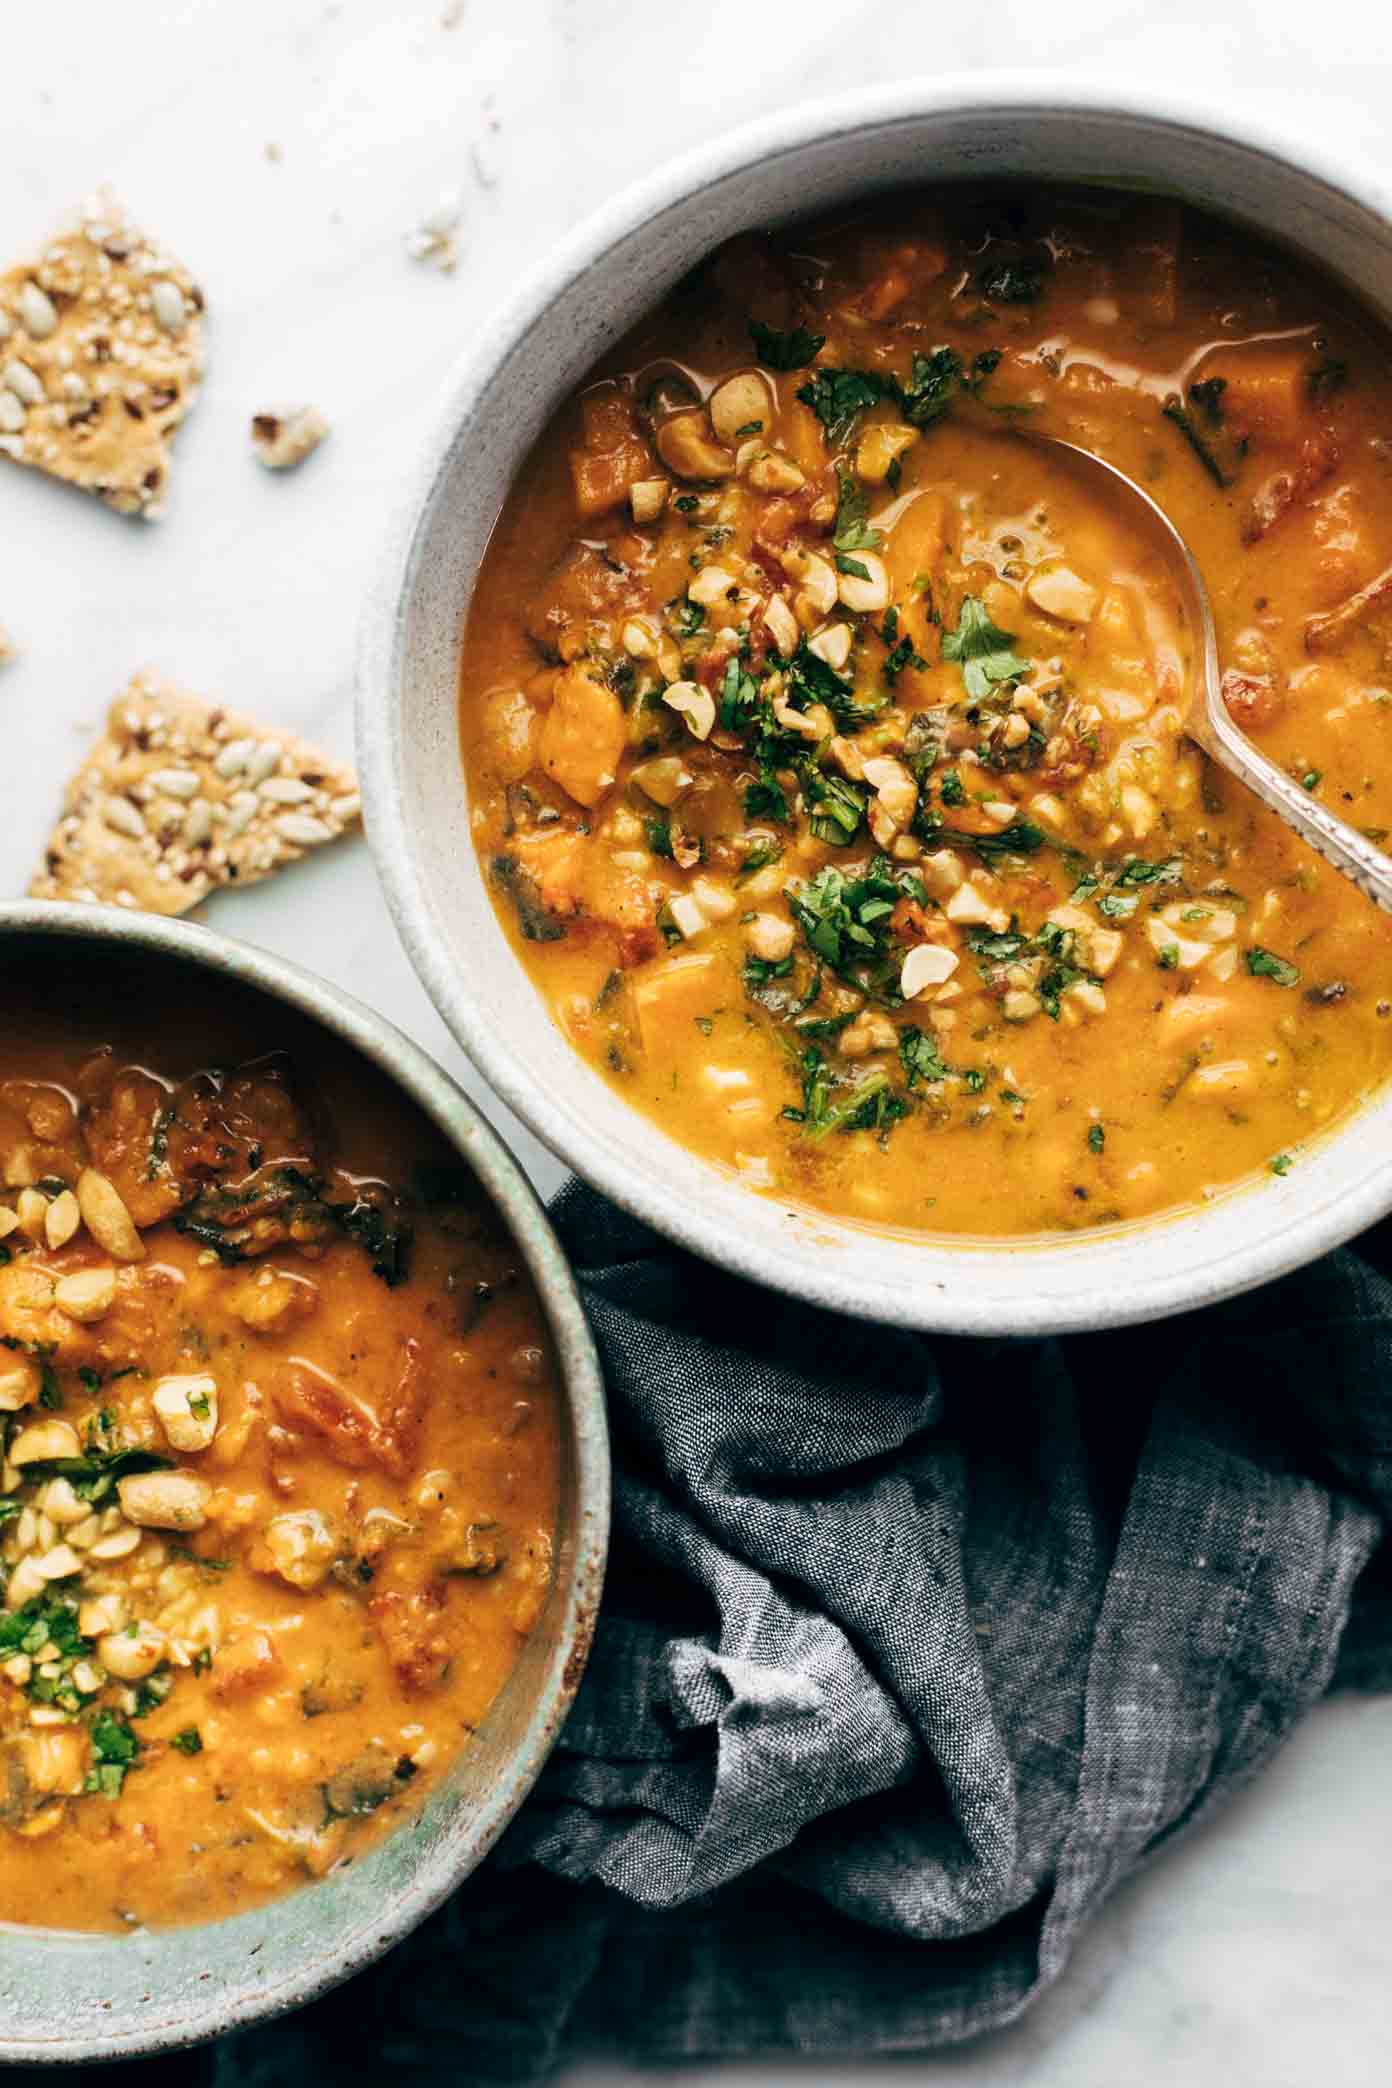 Spicy Peanut Soup with Sweet Potato + Kale from pinchofyum.com on foodiecrush.com